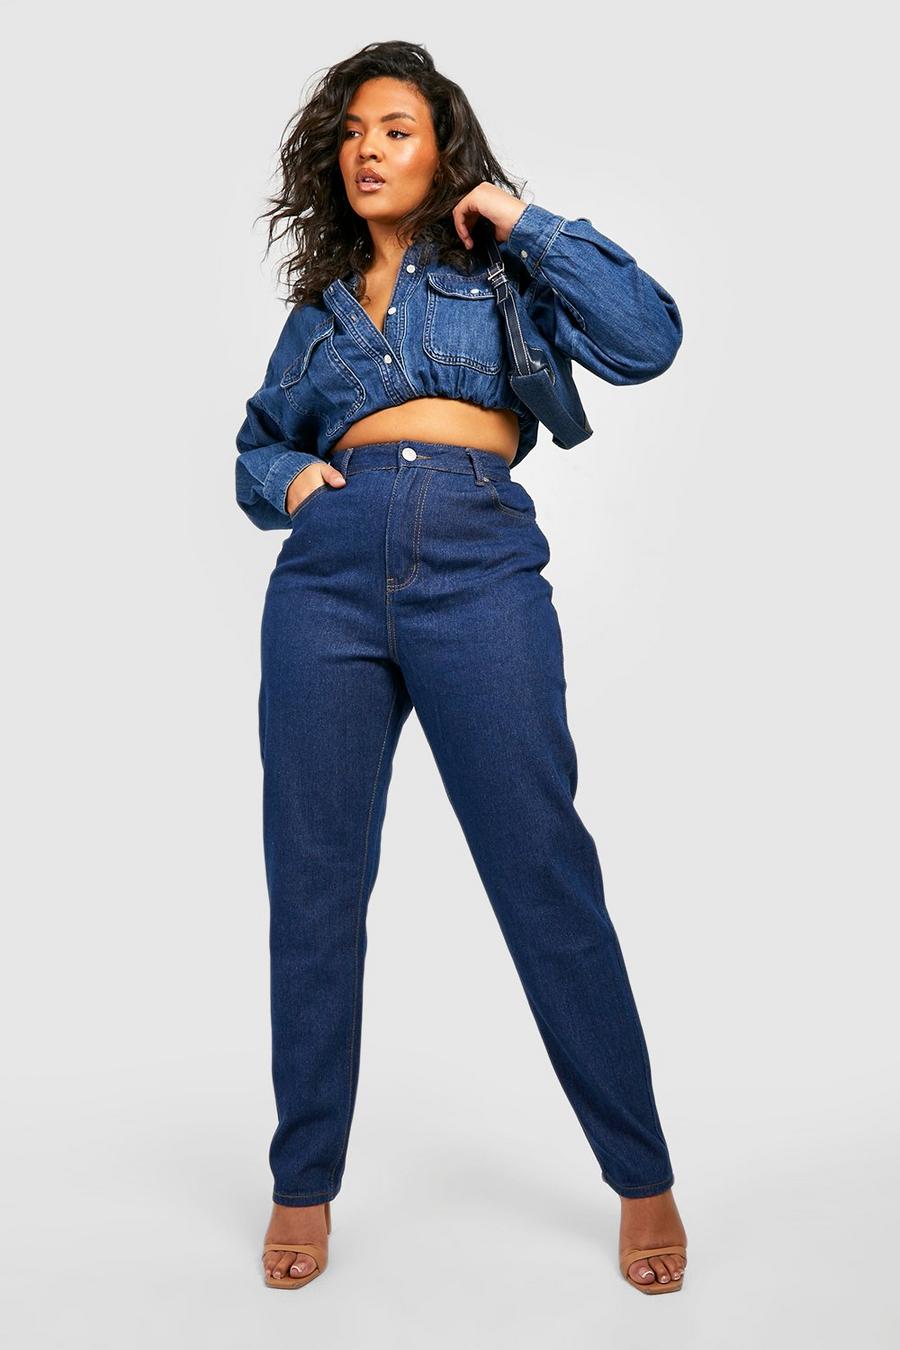 Plus-Size High Waisted Jeans